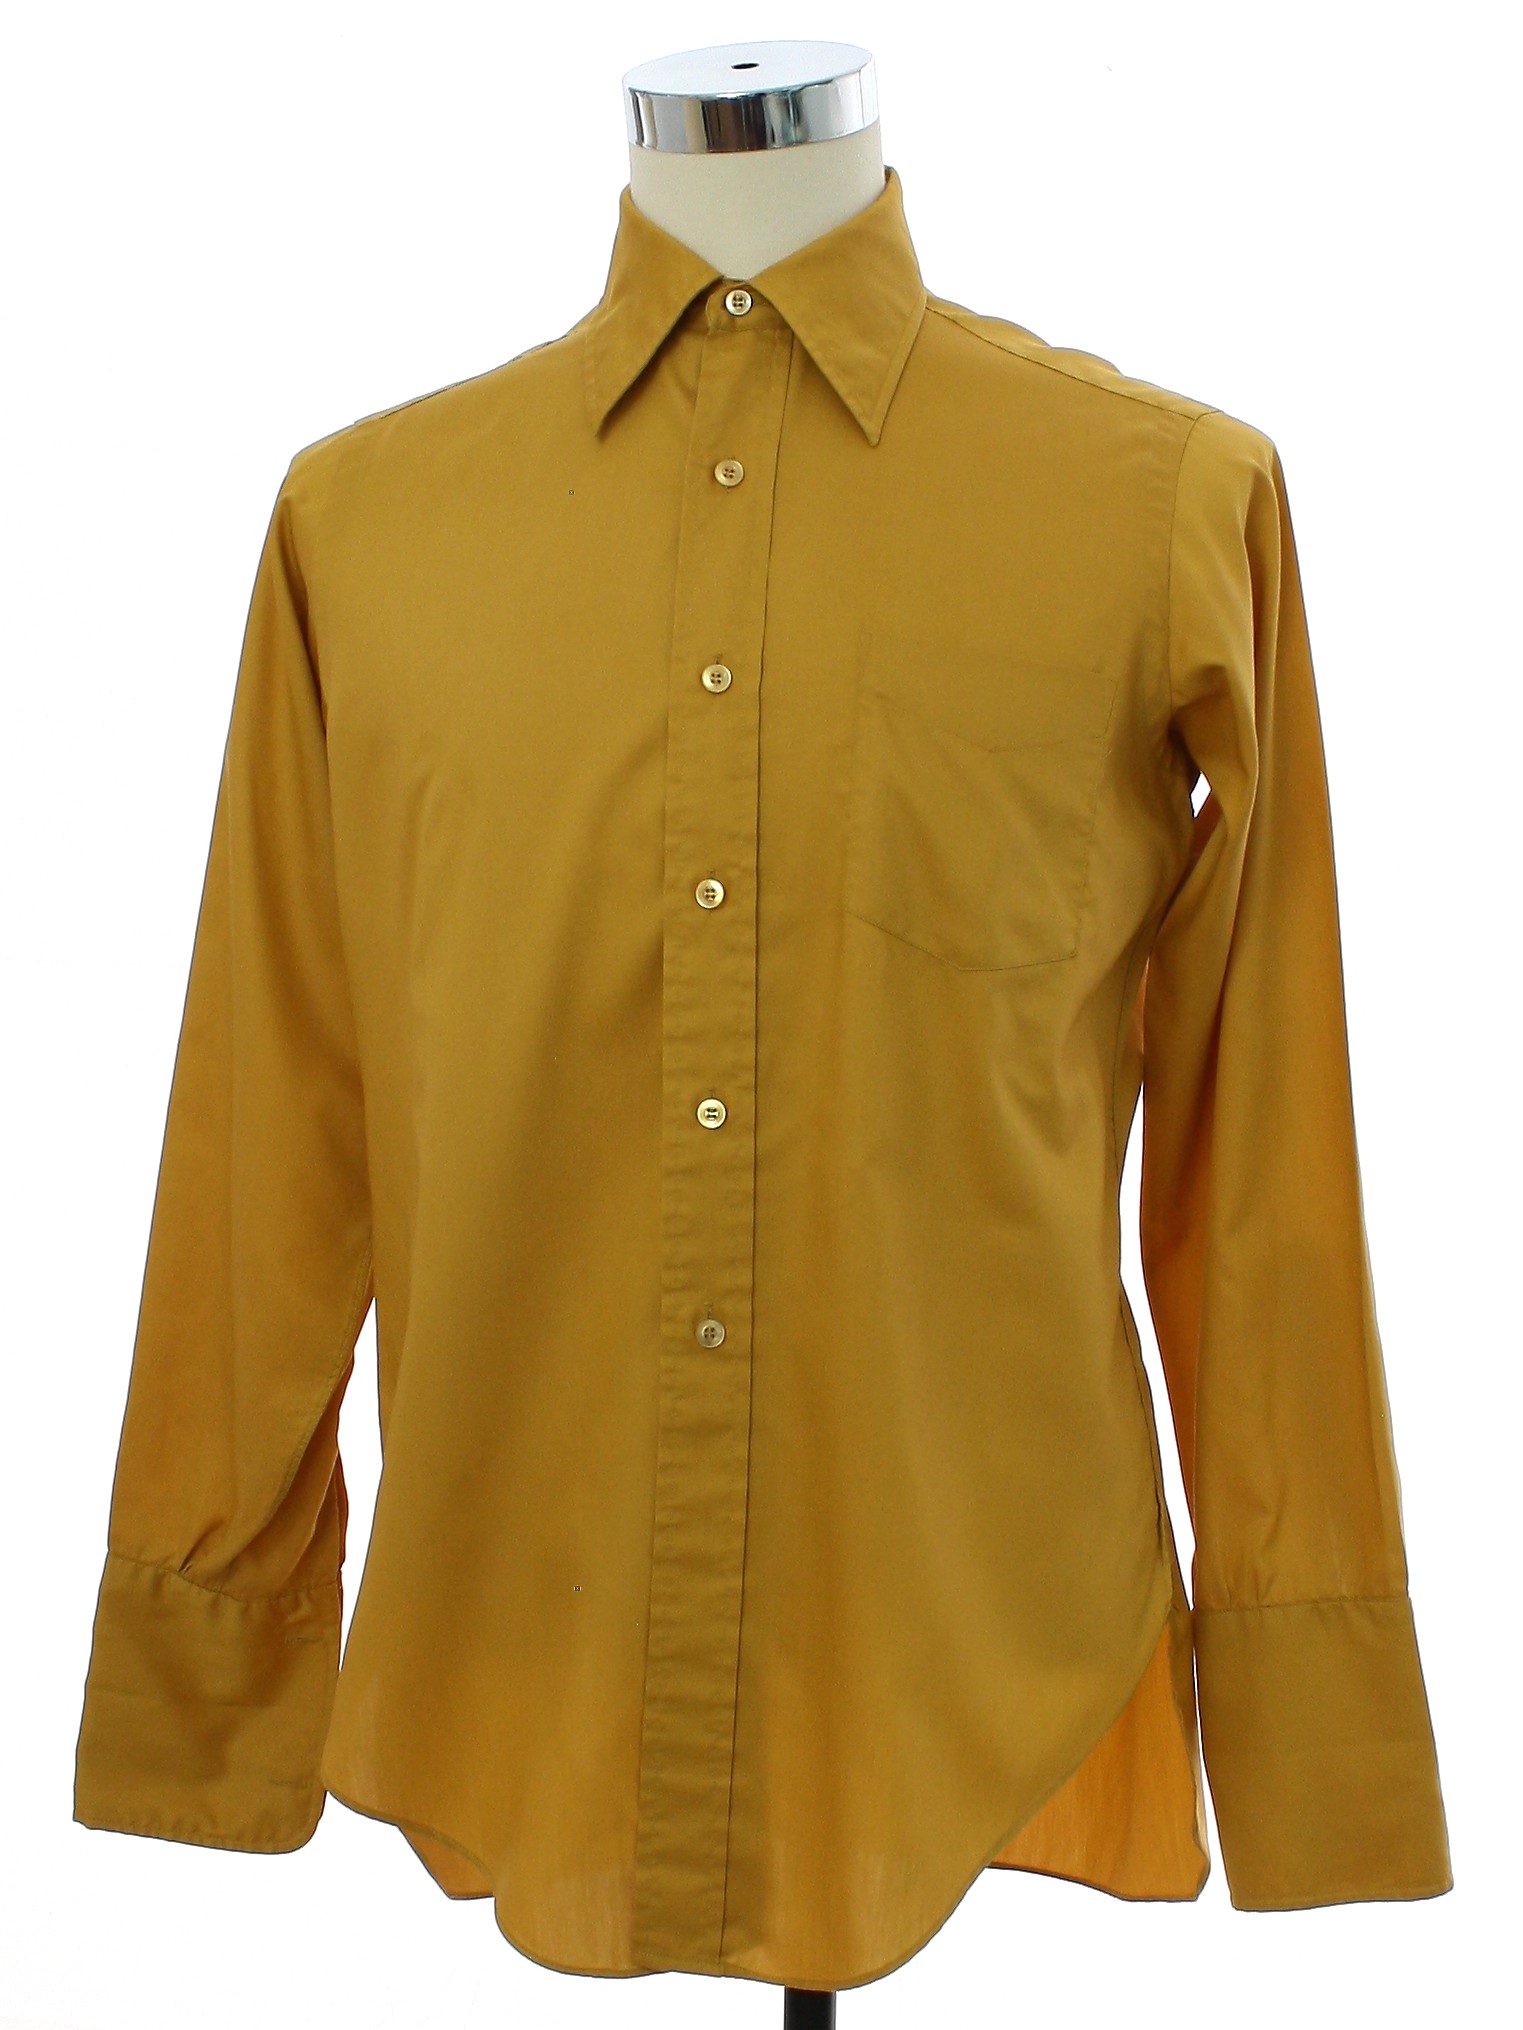 Vintage 1960's Shirt: 60s -Excello- Mens harvest gold polyester cotton ...